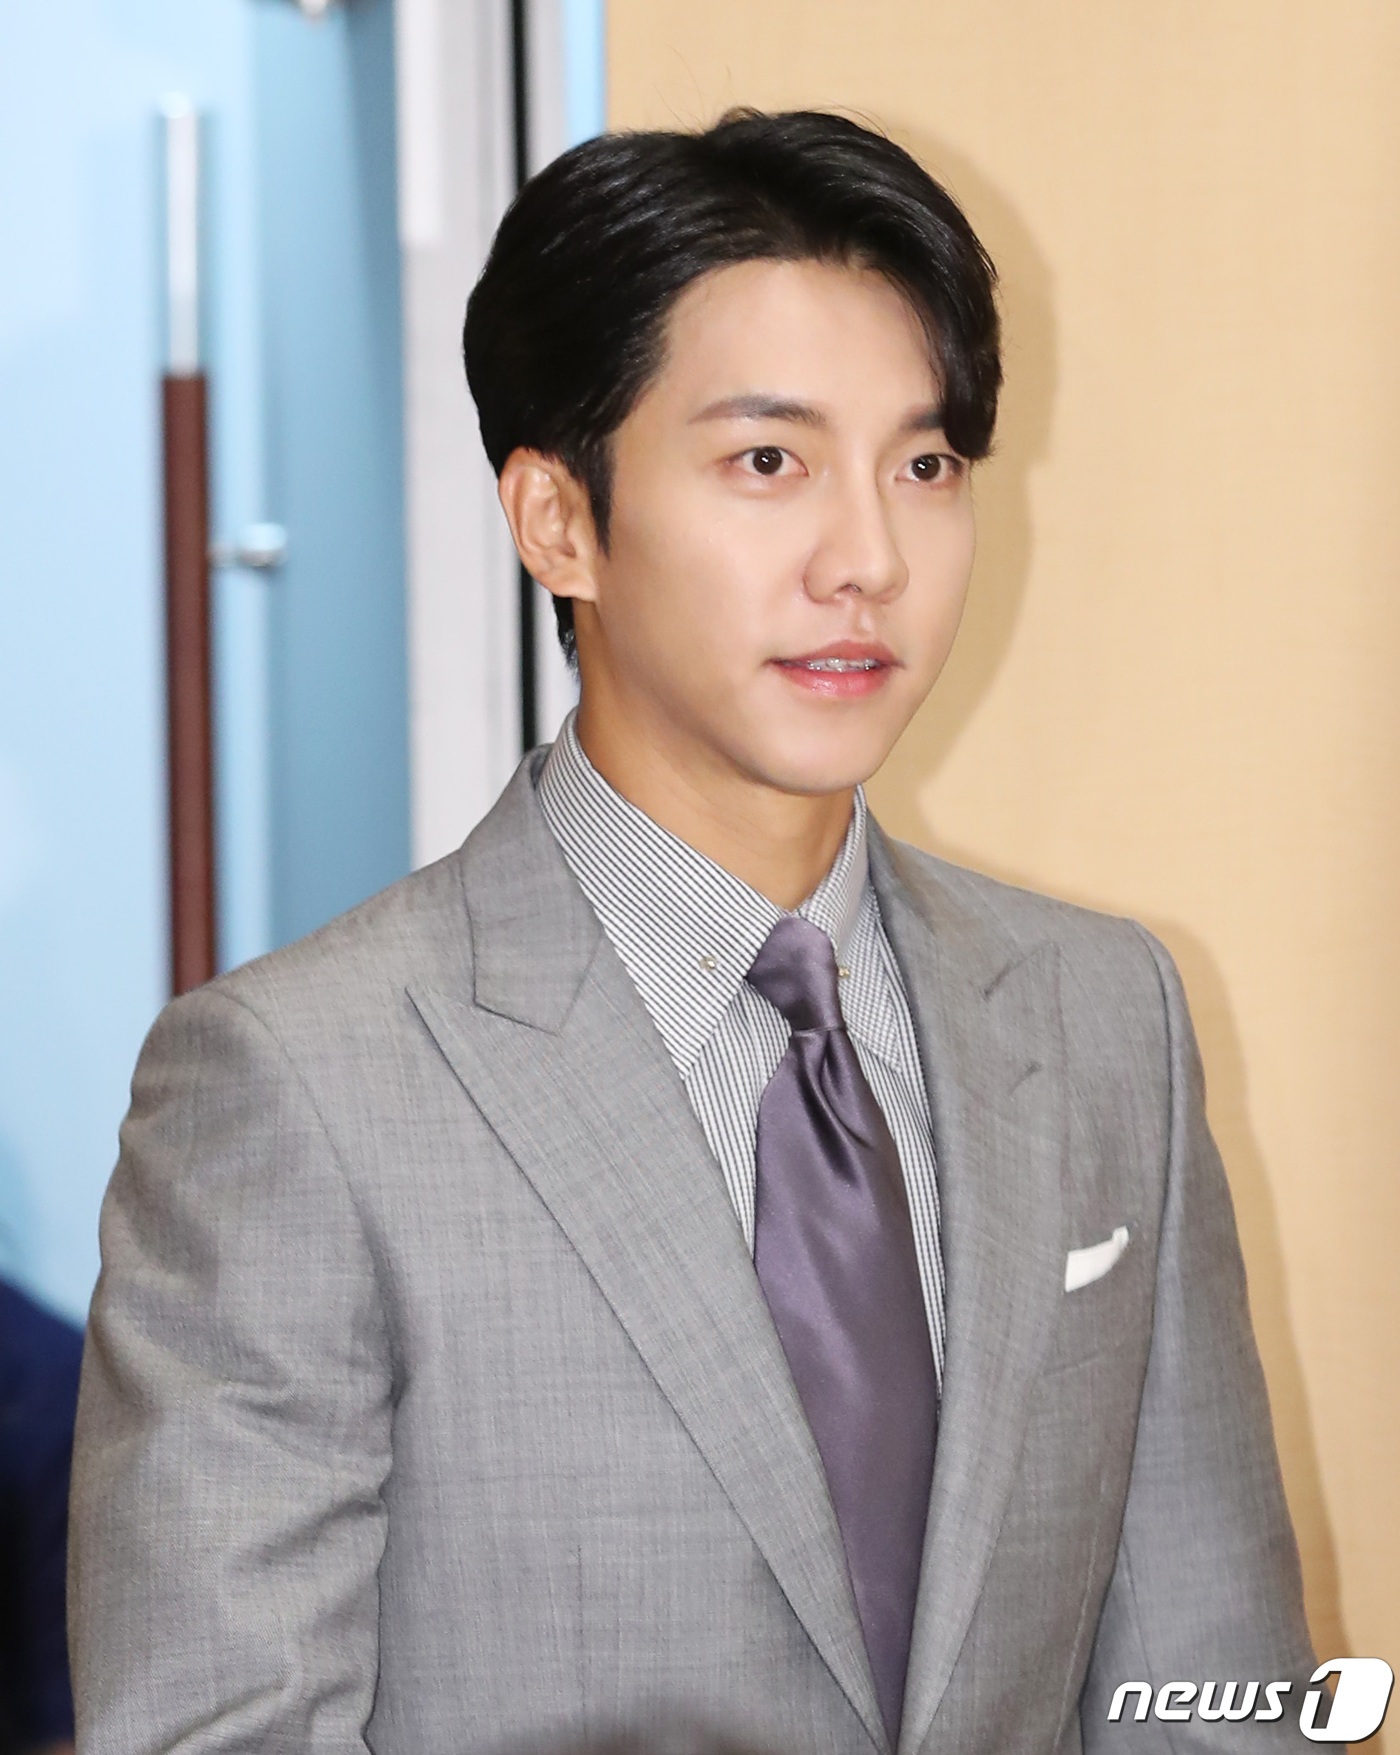 Seoul) = Actor Lee Seung-gi will legally respond to malicious comments.Lee Seung-gis agency, Hook Entertainment, said on its official SNS on the 28th, We decided that the act of flaming and flammer against the artist Lee Seung-gi has reached a level that can not be tolerated anymore.The agency said, We will proceed with legal action through law firm apro to protect our artist. The data of the already collected Flaming and flamers have been transferred to law firm apro on the 26th to sue.We will continue to respond to legal action if malicious slander, such as false information, insults, and defamation, is found through monitoring of the Flamers.Lee Seung-gi also filed more than 100 complaints against those who spread malicious rumors about The Artist in July 2016, including a number of rumors that were fined between 500,000 won and 1 million won, all of which appealed for goodwill, but only one case was punished without goodwill.Meanwhile, Lee Seung-gi is appearing on SBS entertainment program Death Master, Little Forest and SBS gilt drama Baega Bond.